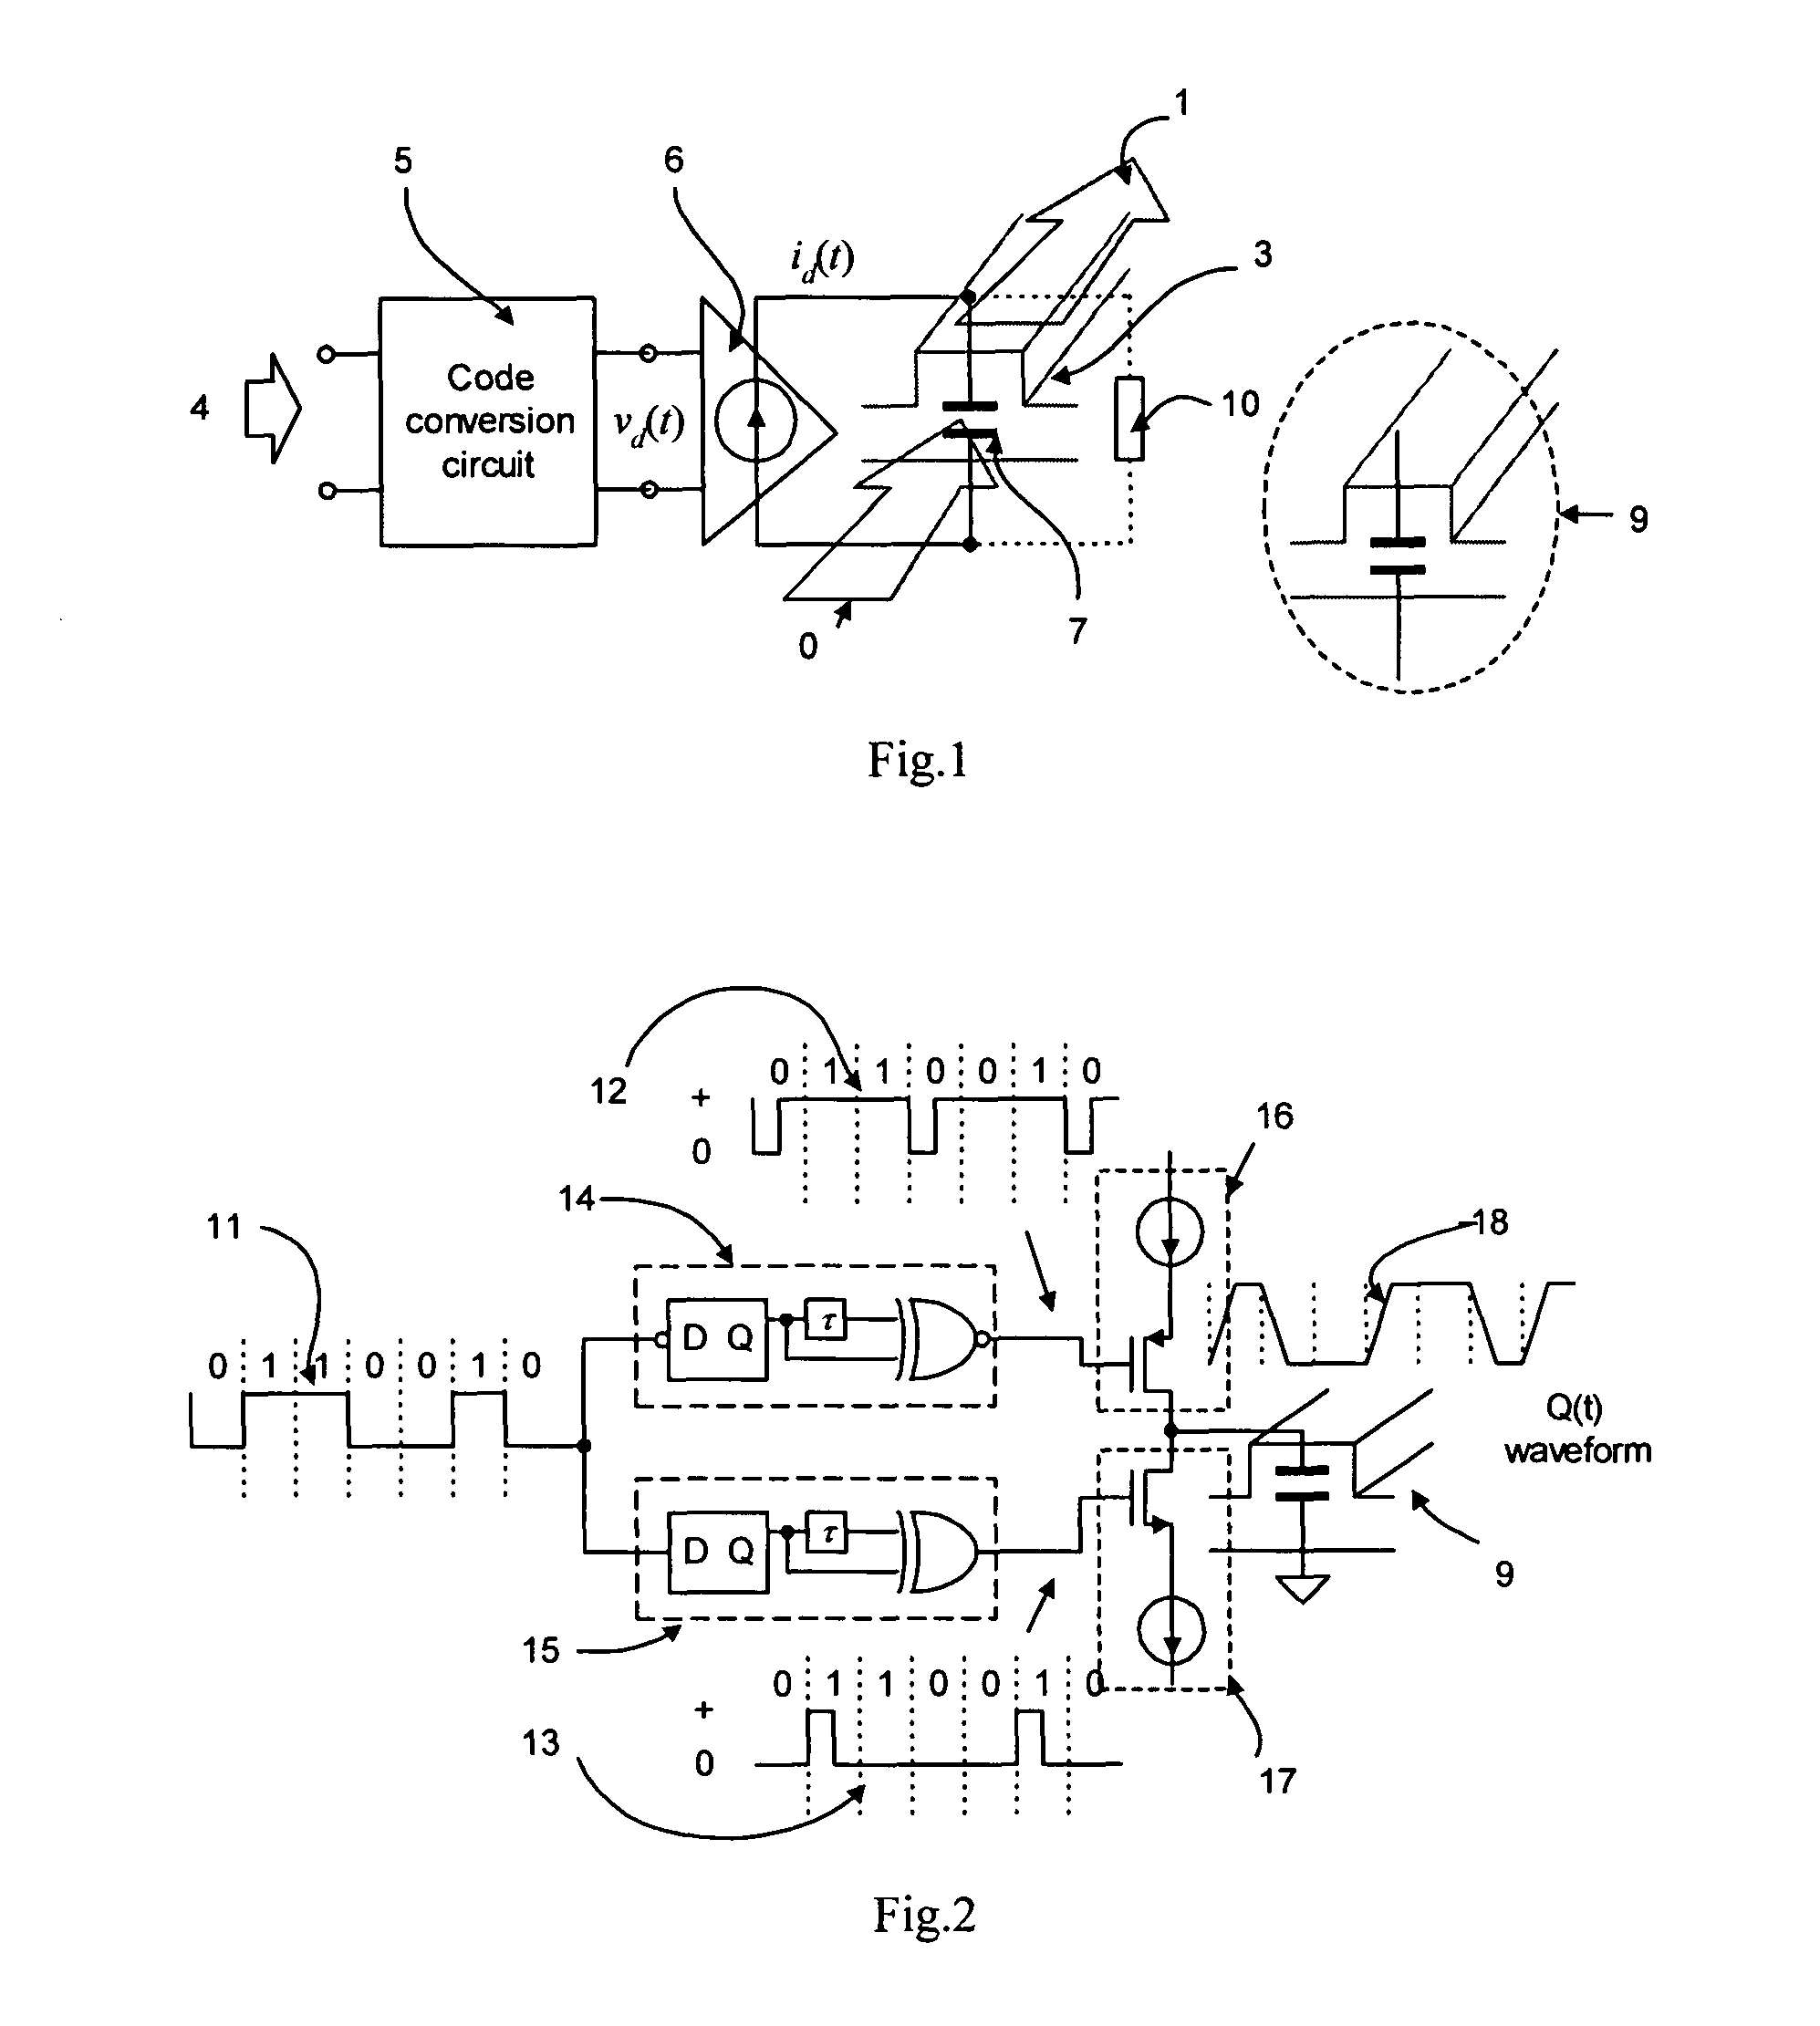 Circuit architecture for electro-optic modulation based on free carrier dispersion effect and the waveguide capacitor structures for such modulator circuitry using CMOS or Bi-CMOS process